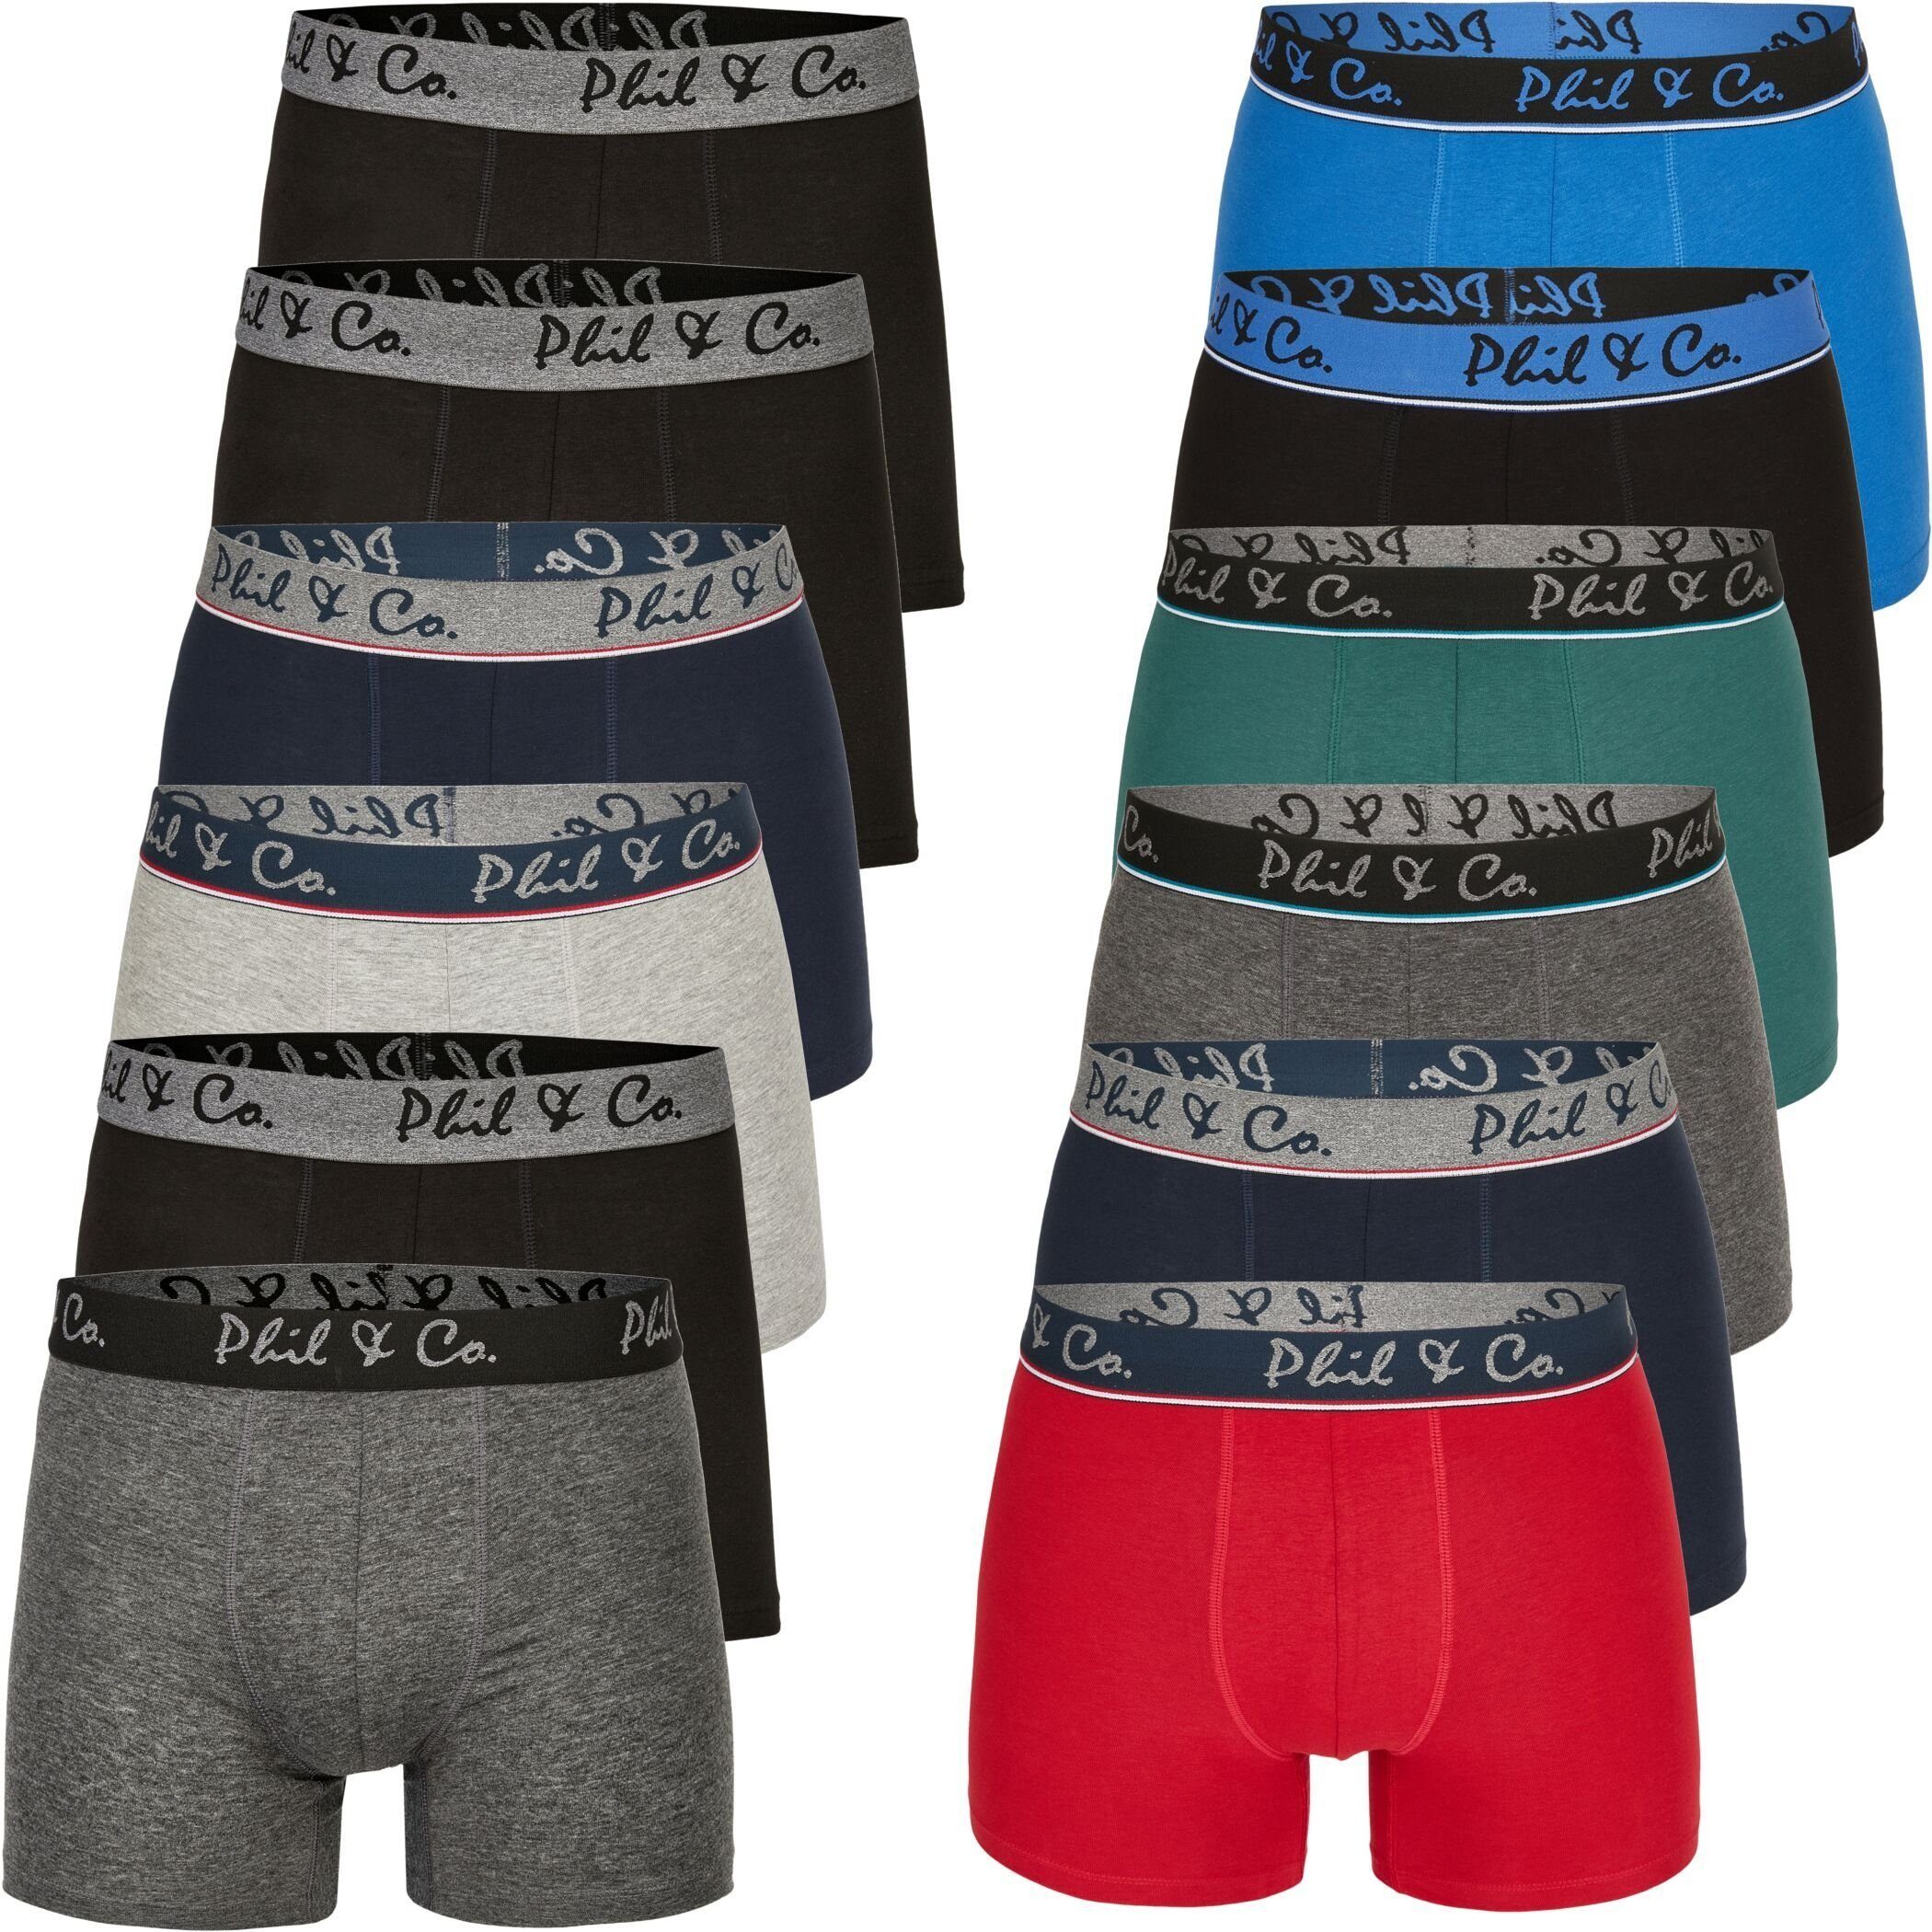 Boxershorts & Trunk Berlin Phil Short Pack DESIGN 12 (1-St) Phil & Pant Jersey Co Co. FARBWAHL Boxershorts 02